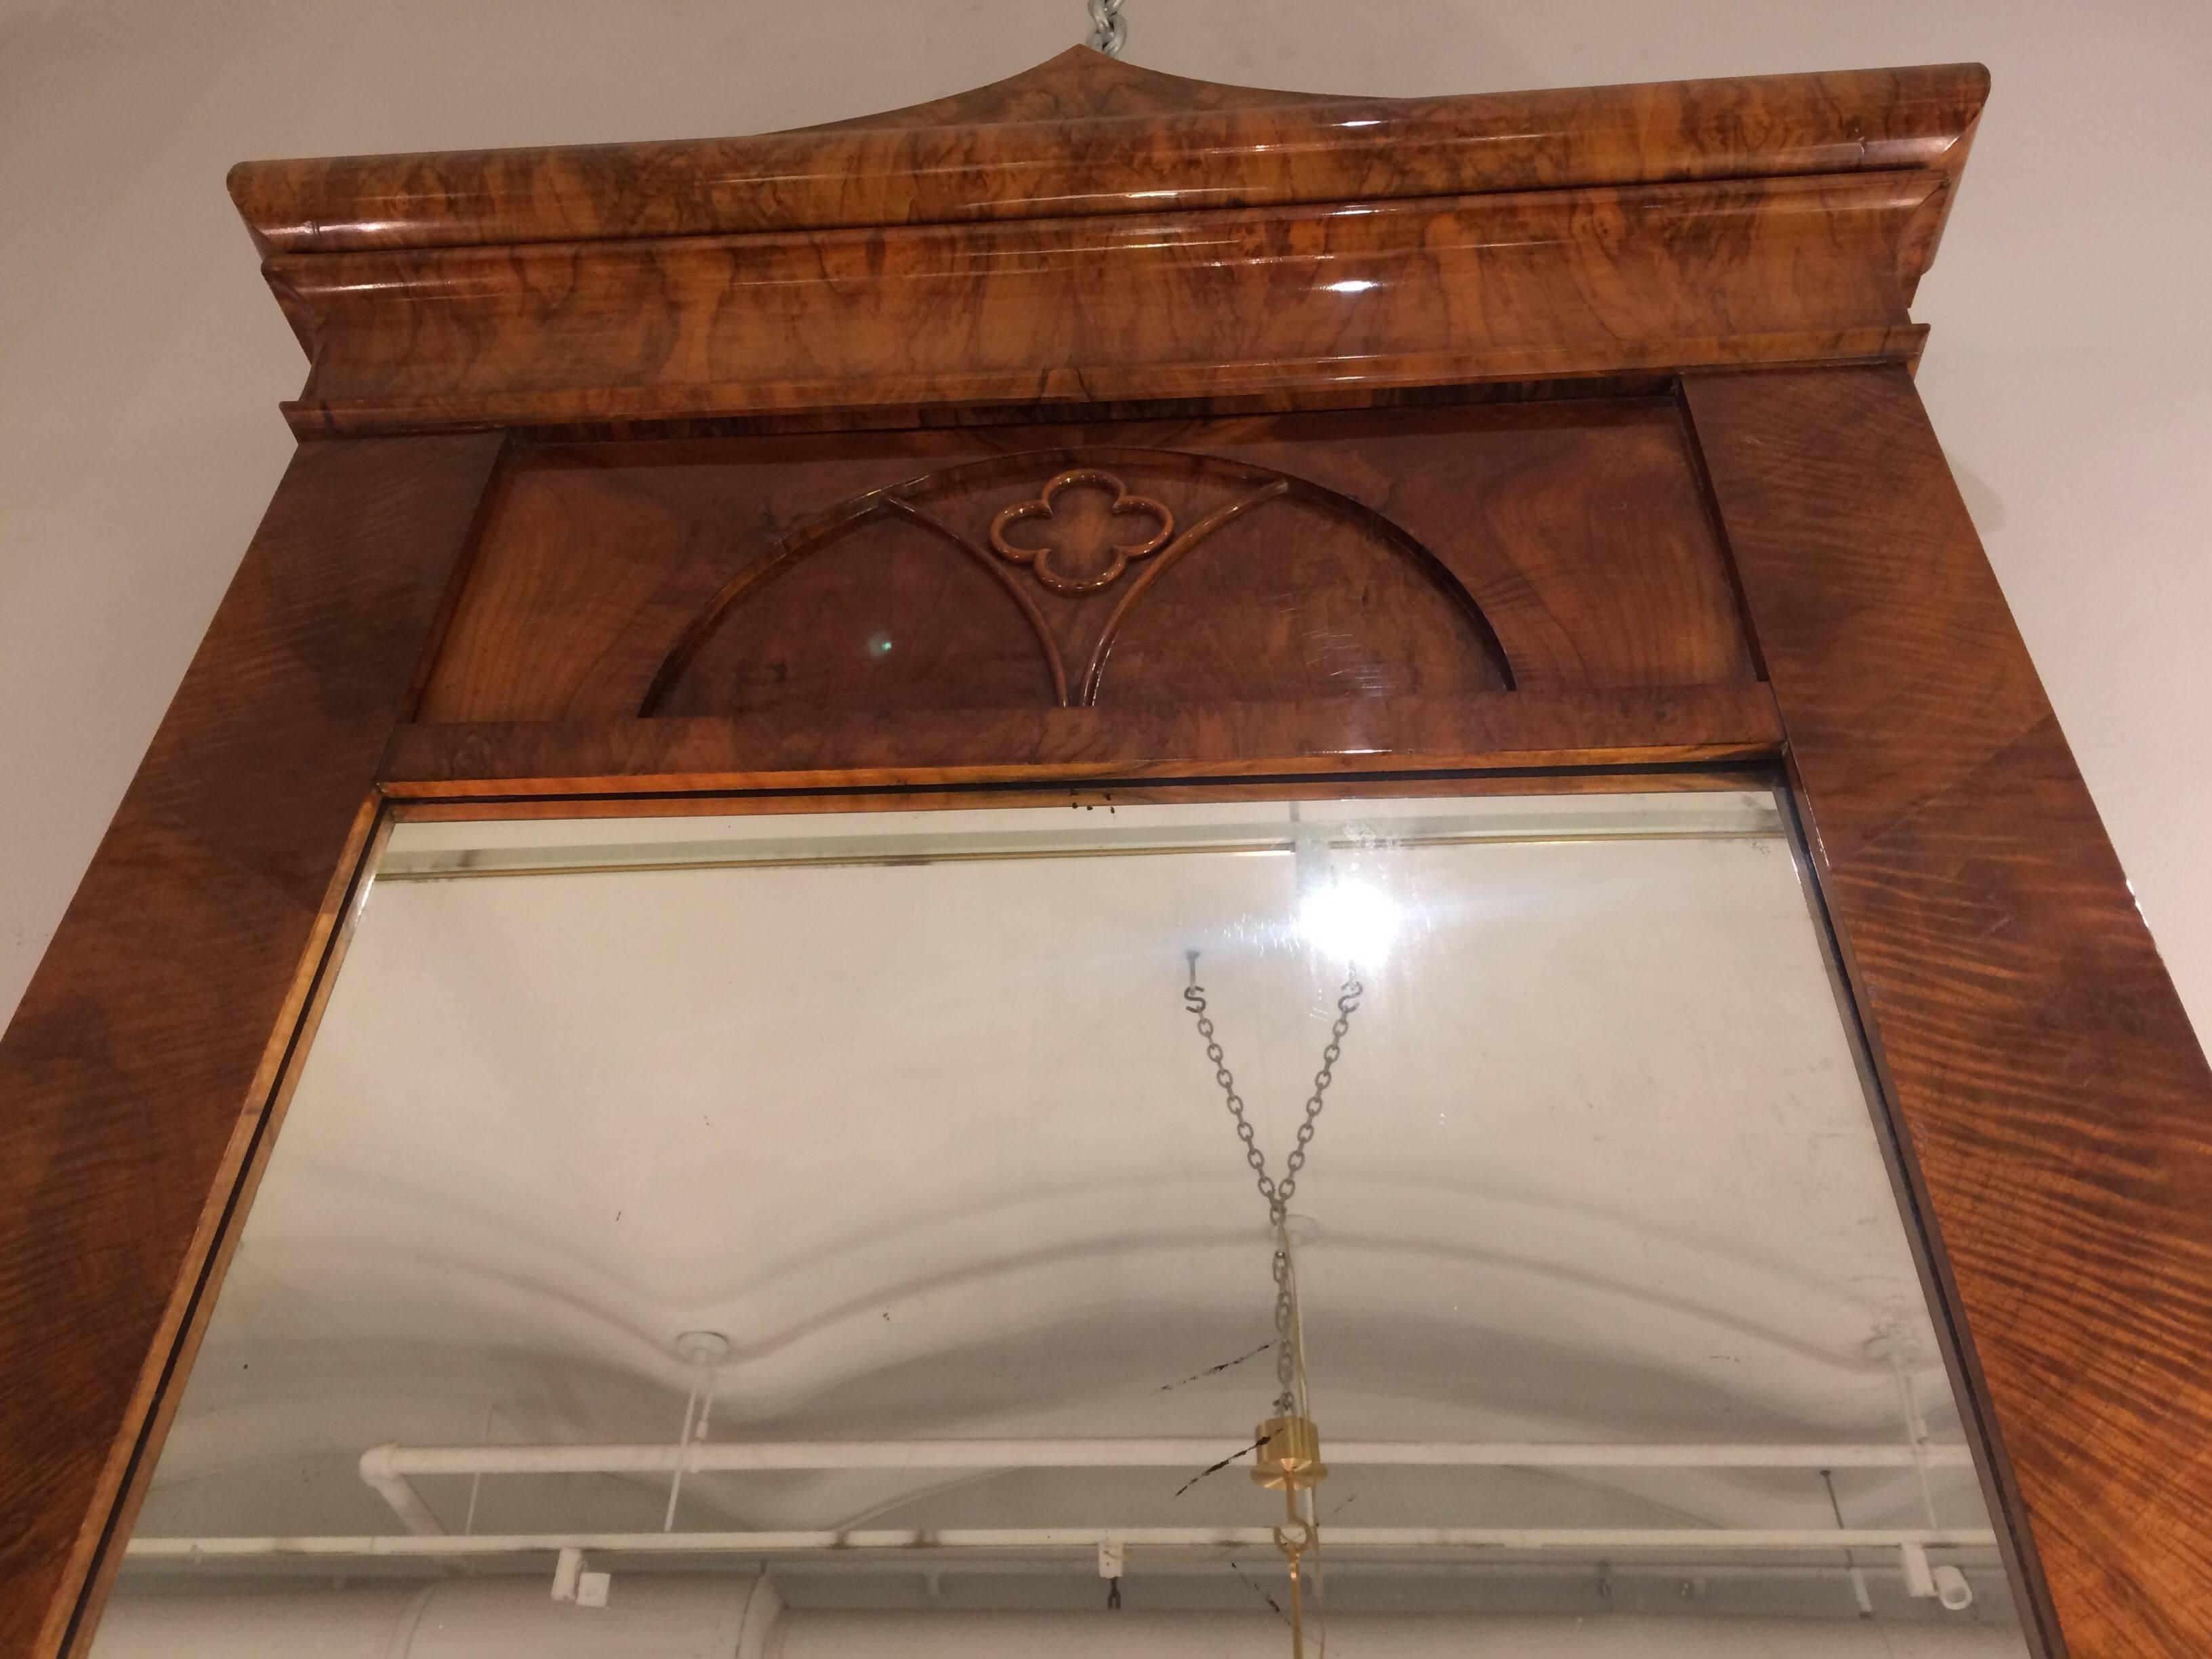 An outstanding Biedermeier period walnut mirror of impressive scale from Austria circa 1820. The unique pagoda shaped crown surmounts an interior arch enclosing a raised four lobe medallion. Constructed of highly figured burl walnut with Inlay work